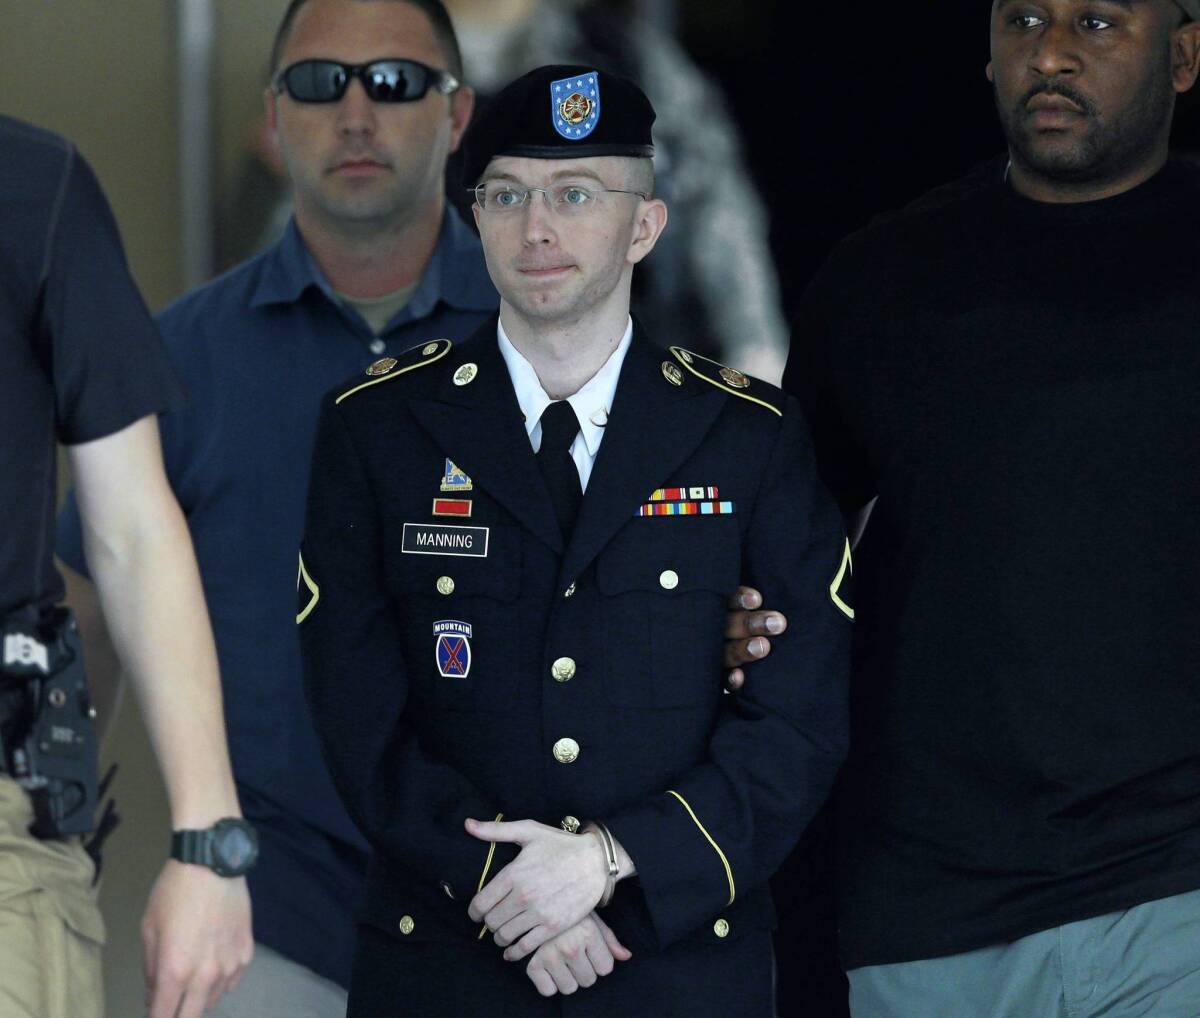 Army Pfc. Bradley Manning could face up to 90 years in prison after being convicted on espionage charges.